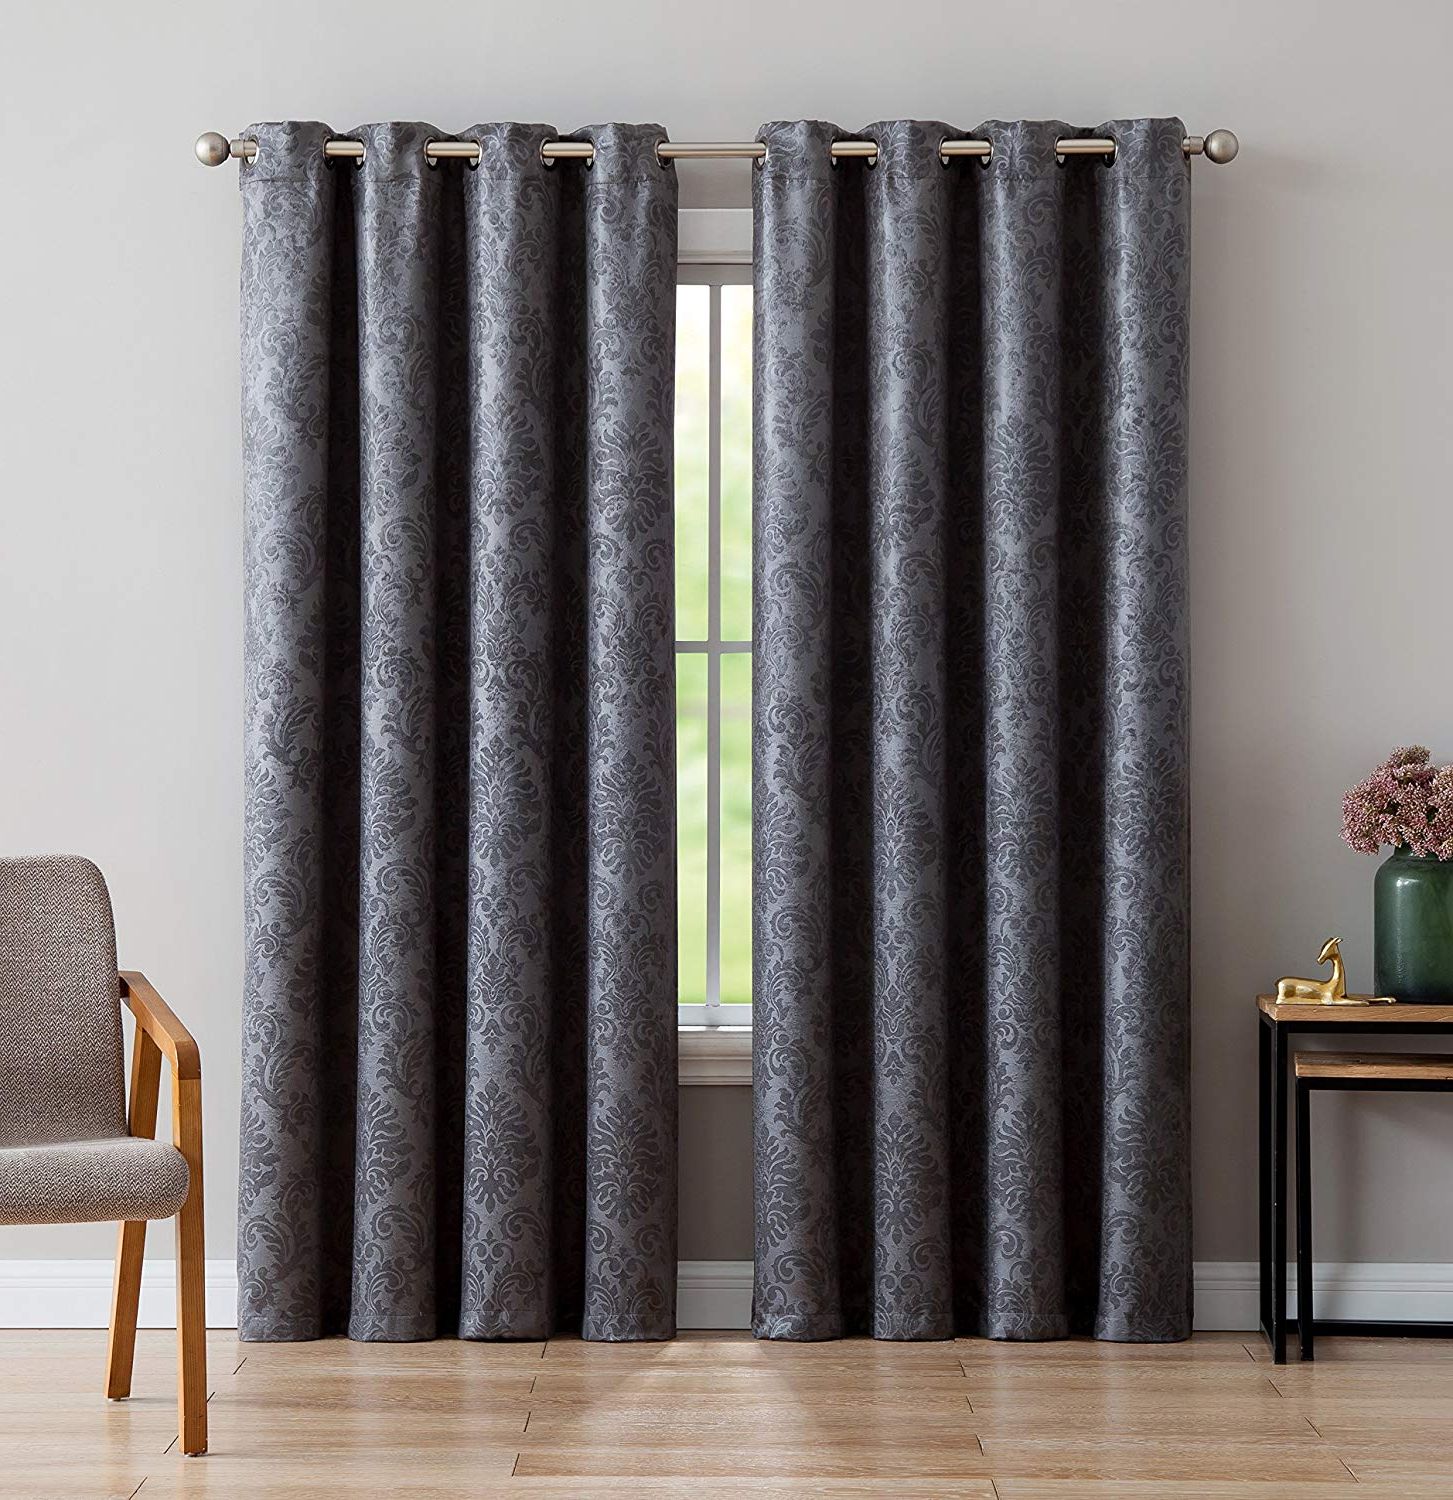 [%evelyn – Embossed Thermal Weaved Blackout Curtain With 8 Grommets – Room  Darkening & Noise Reduction Fabric – Blocks Up To 97% Of Sunlight – Premium Pertaining To Preferred Embossed Thermal Weaved Blackout Grommet Drapery Curtains|embossed Thermal Weaved Blackout Grommet Drapery Curtains Regarding Widely Used Evelyn – Embossed Thermal Weaved Blackout Curtain With 8 Grommets – Room  Darkening & Noise Reduction Fabric – Blocks Up To 97% Of Sunlight – Premium|most Current Embossed Thermal Weaved Blackout Grommet Drapery Curtains Pertaining To Evelyn – Embossed Thermal Weaved Blackout Curtain With 8 Grommets – Room  Darkening & Noise Reduction Fabric – Blocks Up To 97% Of Sunlight – Premium|most Up To Date Evelyn – Embossed Thermal Weaved Blackout Curtain With 8 Grommets – Room  Darkening & Noise Reduction Fabric – Blocks Up To 97% Of Sunlight – Premium Intended For Embossed Thermal Weaved Blackout Grommet Drapery Curtains%] (View 1 of 20)